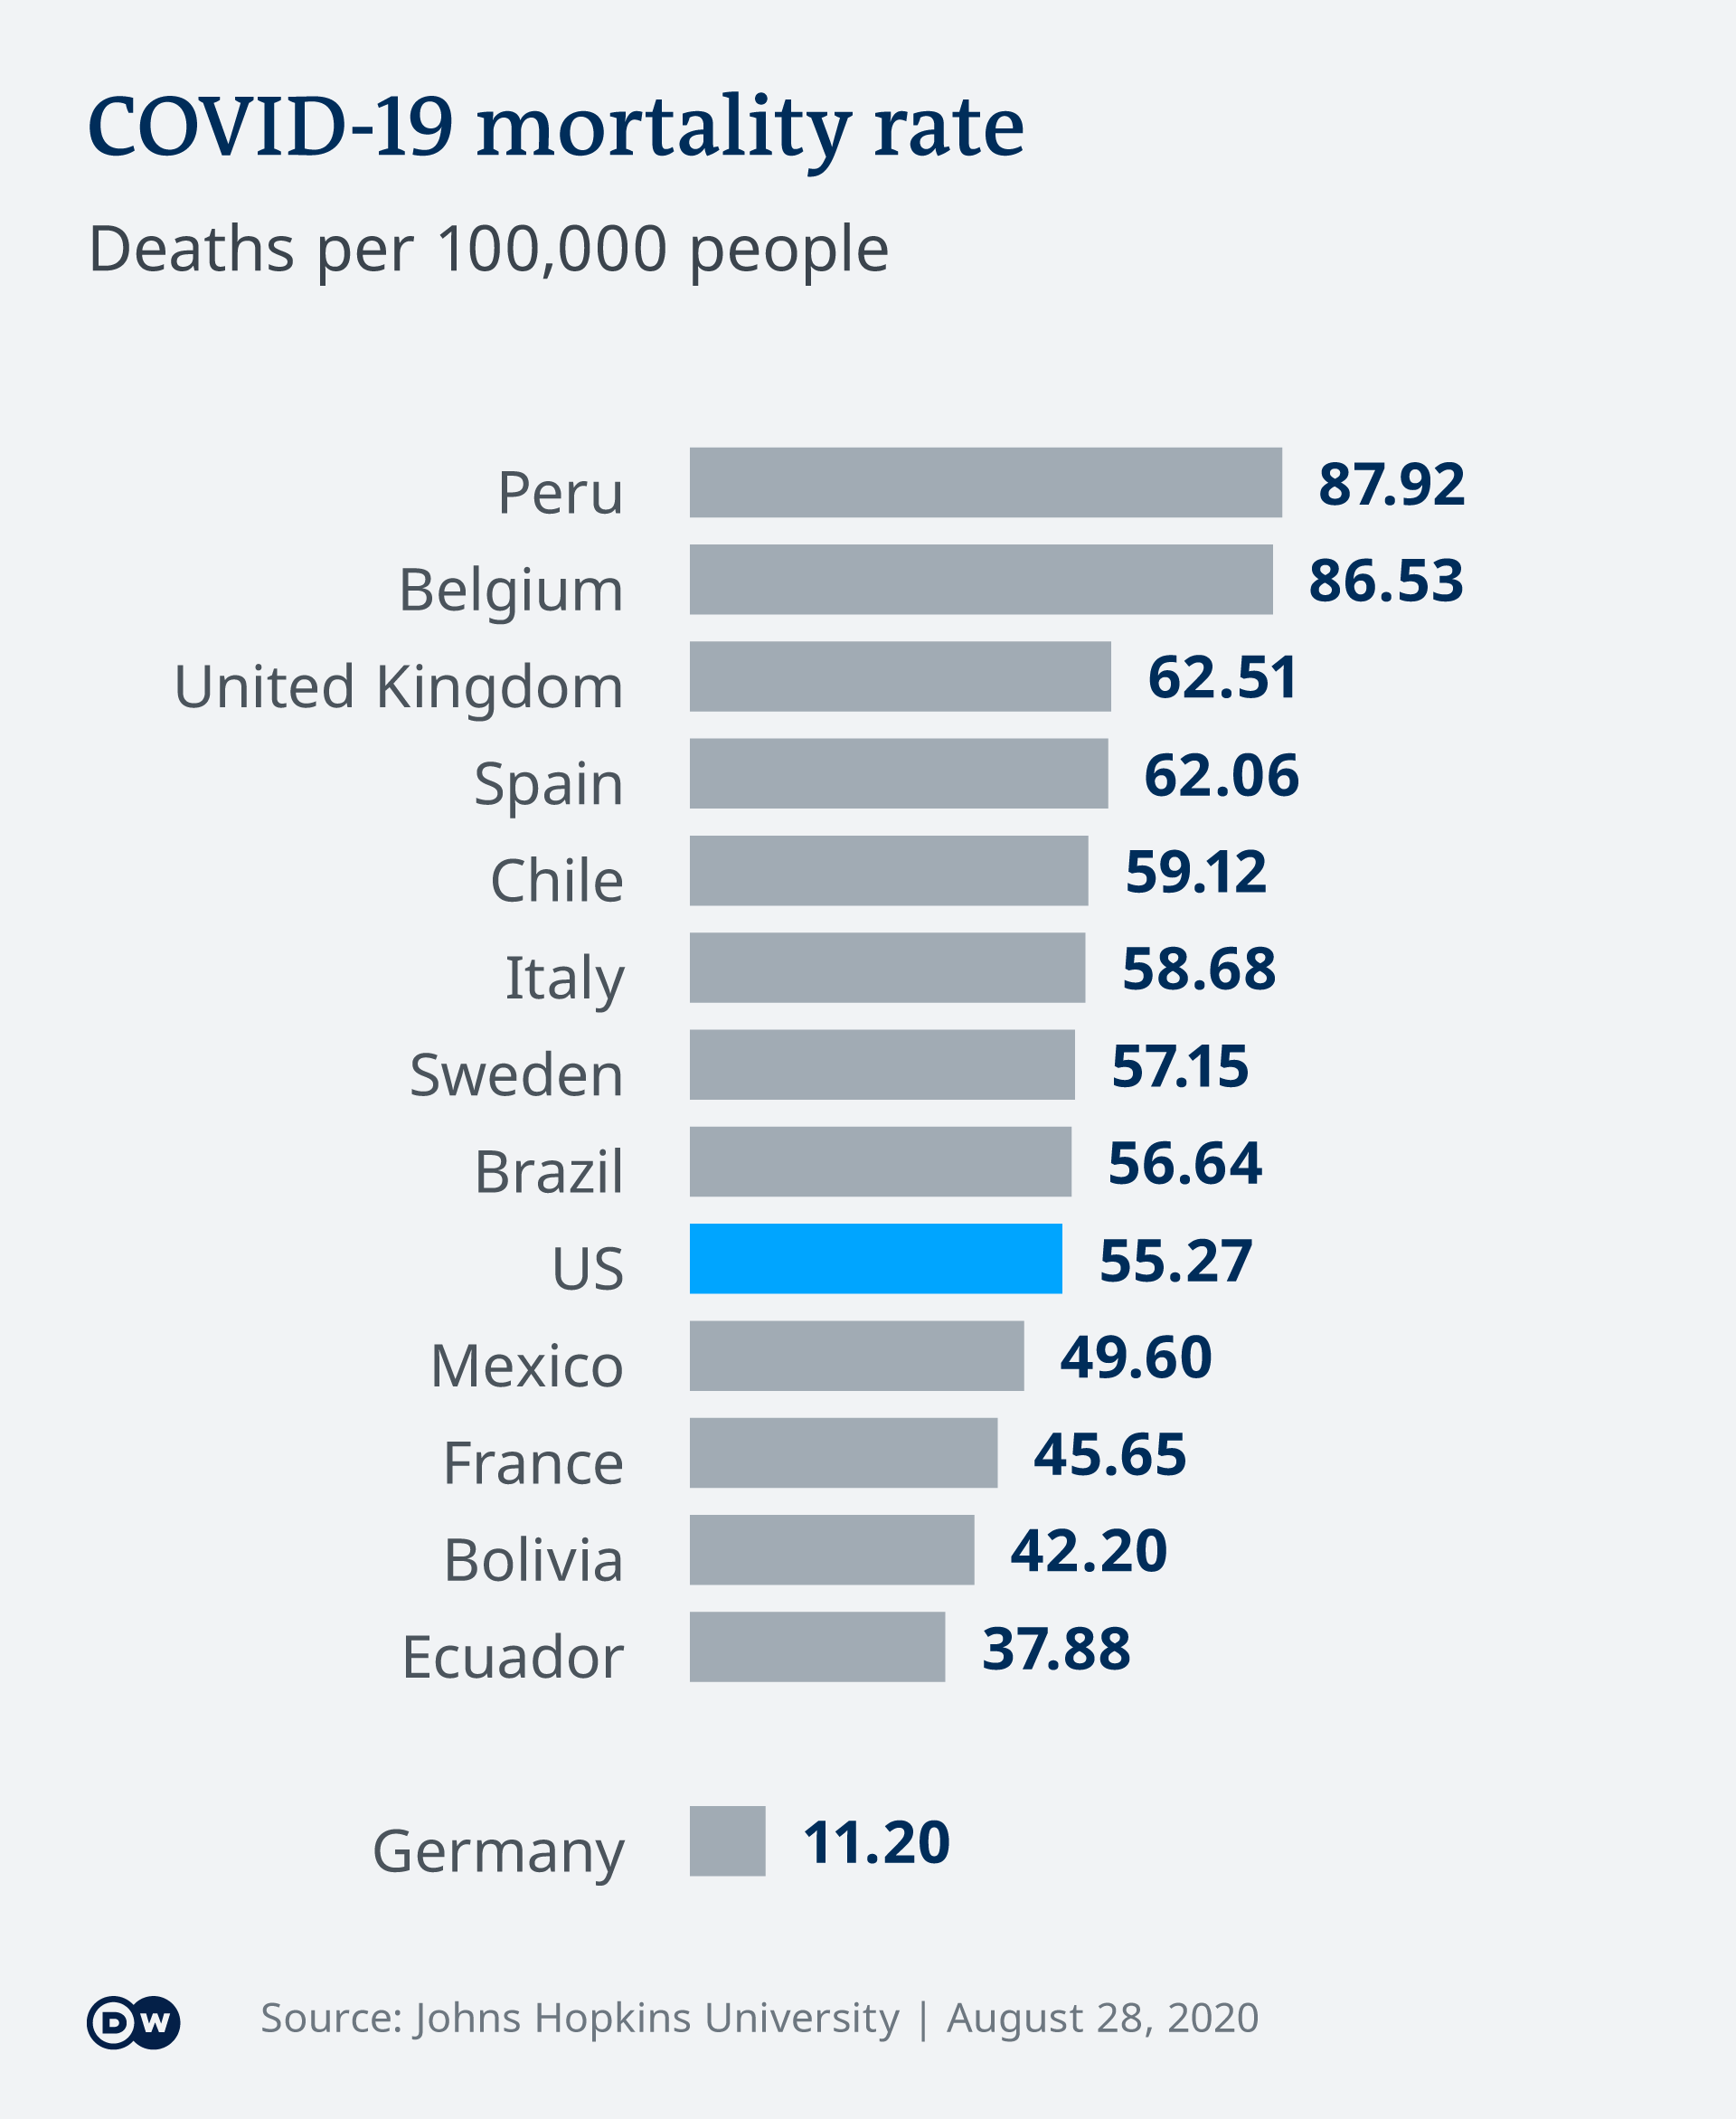 DW graphic showing the COVID-19 mortality rates per 100,000 inhabitants of various countries. Peru tops the chart at 87.92, followed by Belgium and the UK. The US weighs in at 55.27 and Germany at 11.20.